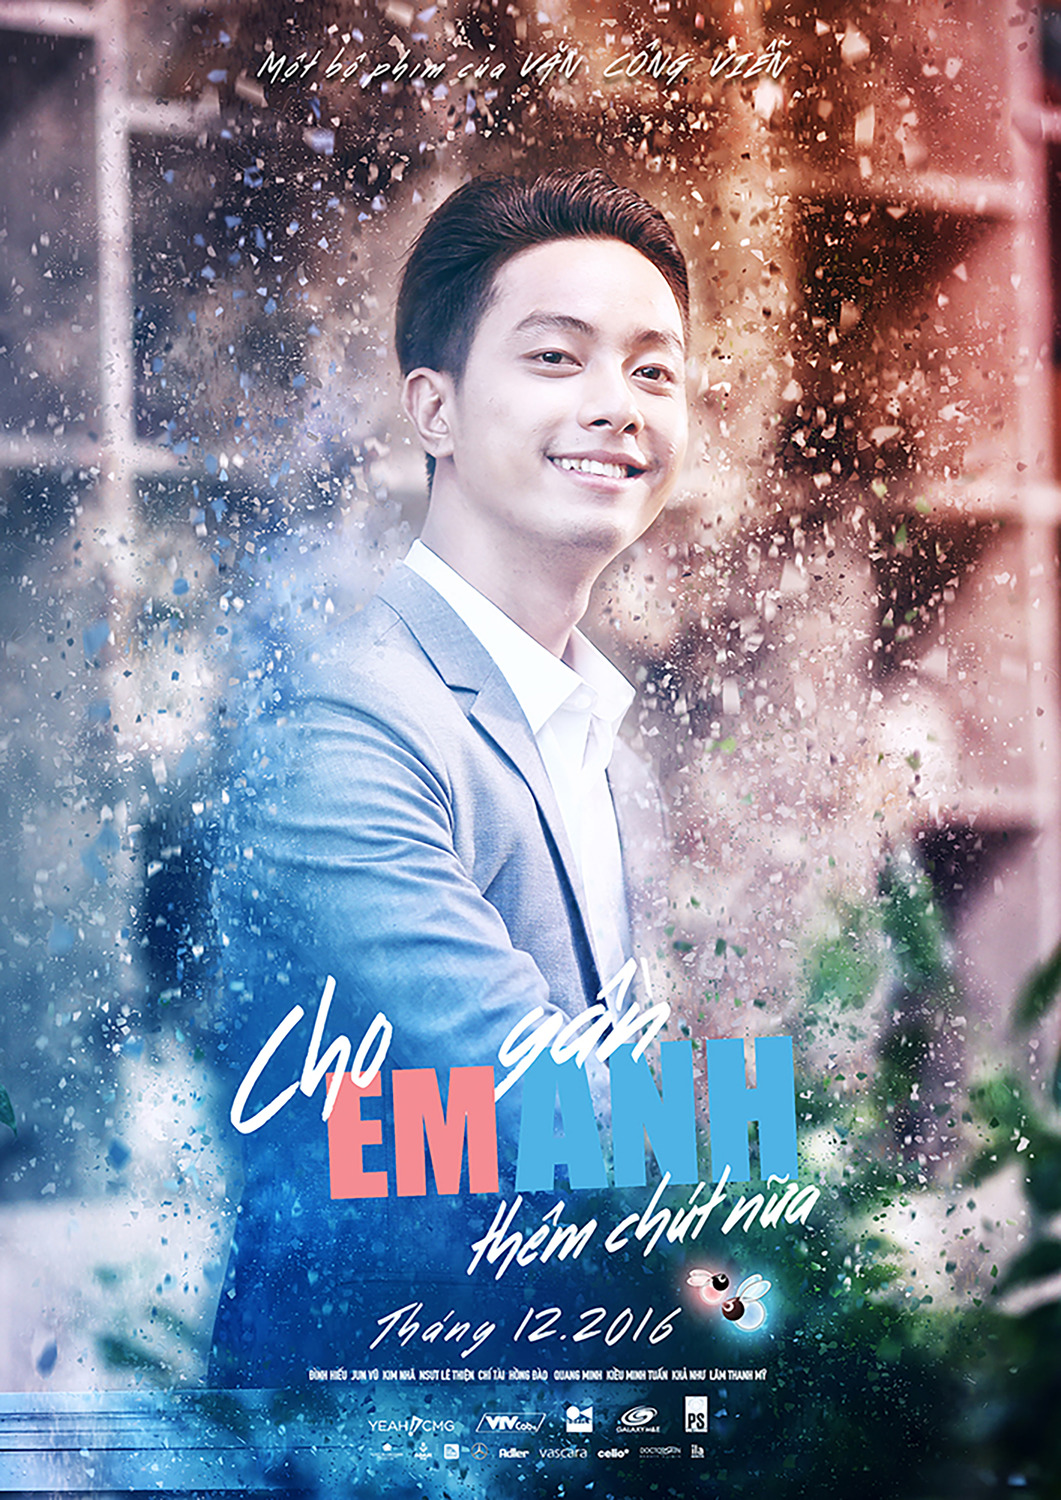 Extra Large Movie Poster Image for Cho em gần anh thêm chút nữa (#5 of 14)